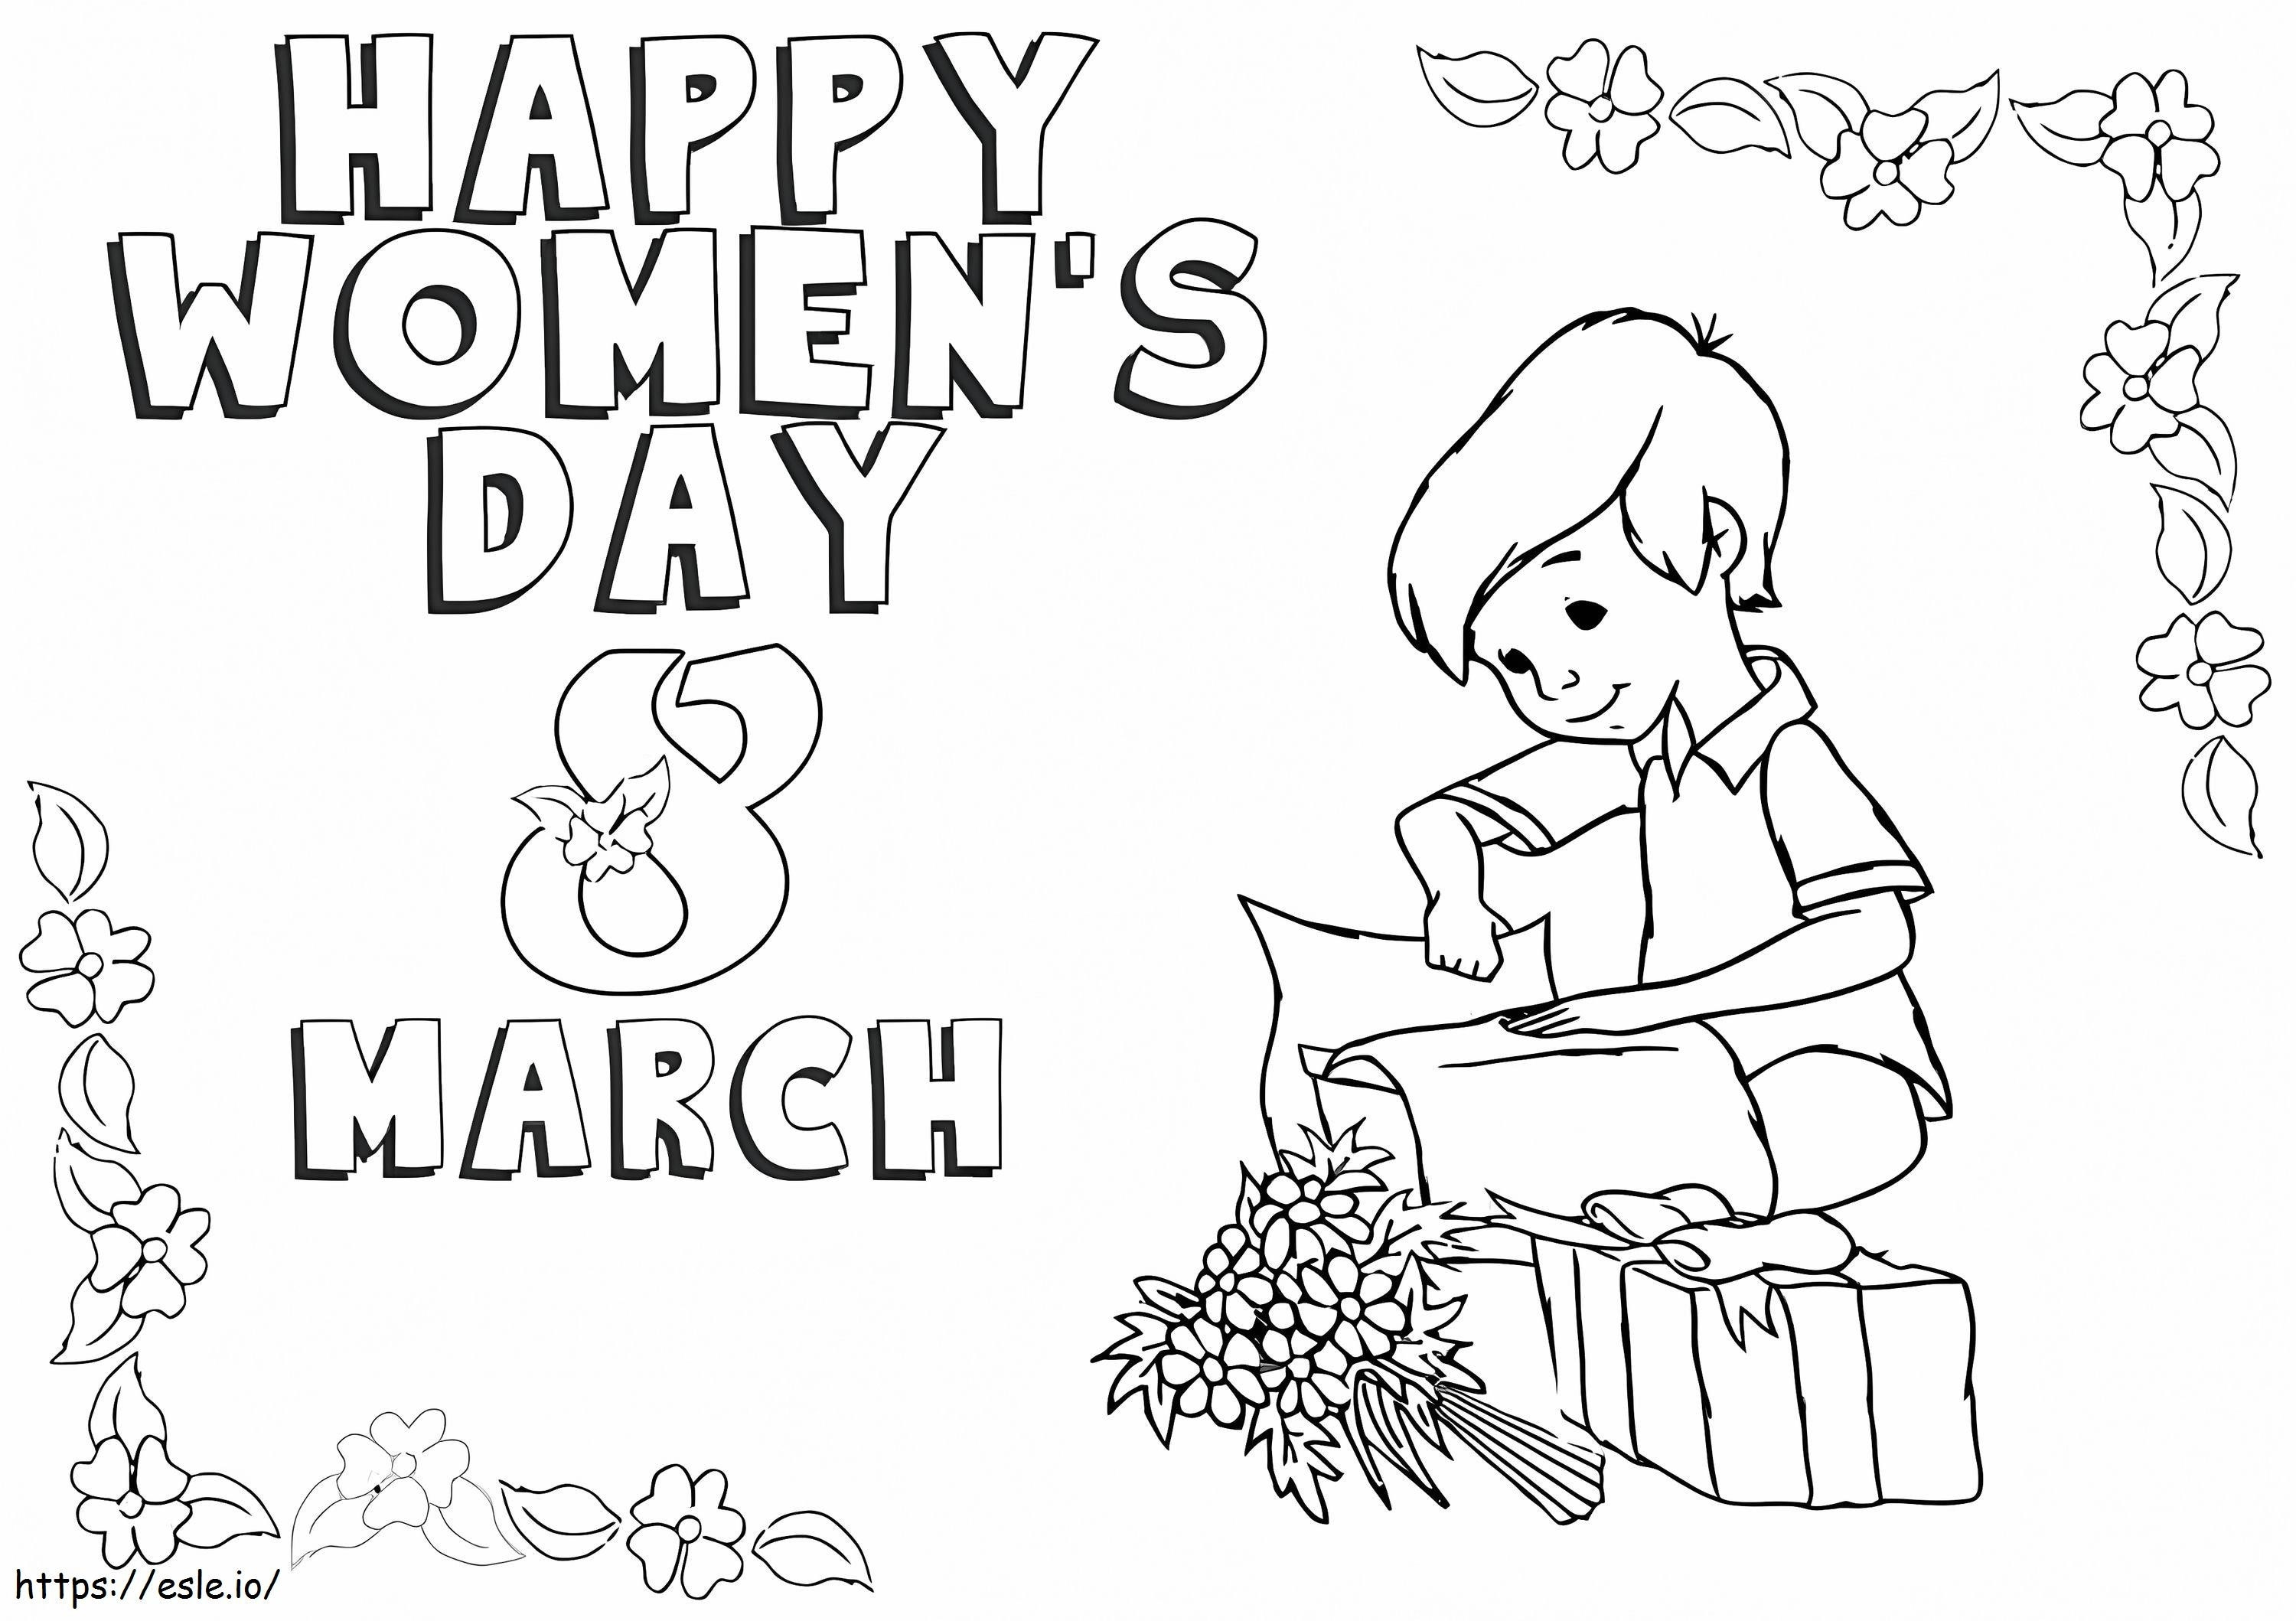 Womens Day March Coloring Page 1 coloring page